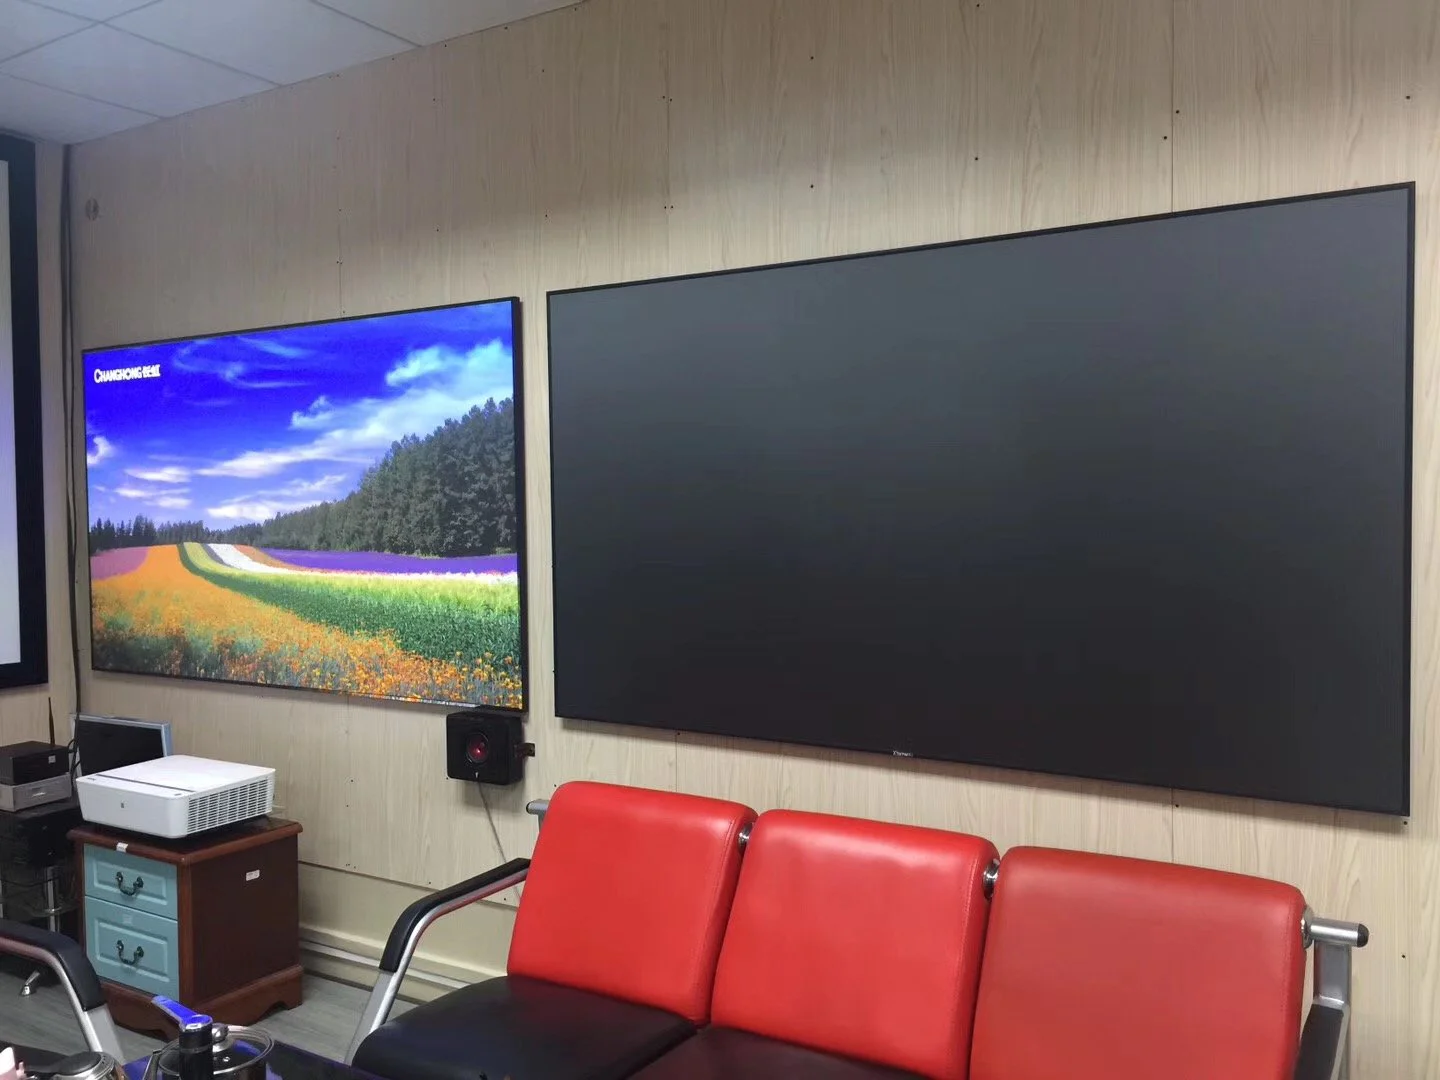 projection ambient XY Screens ultra short throw projector screen